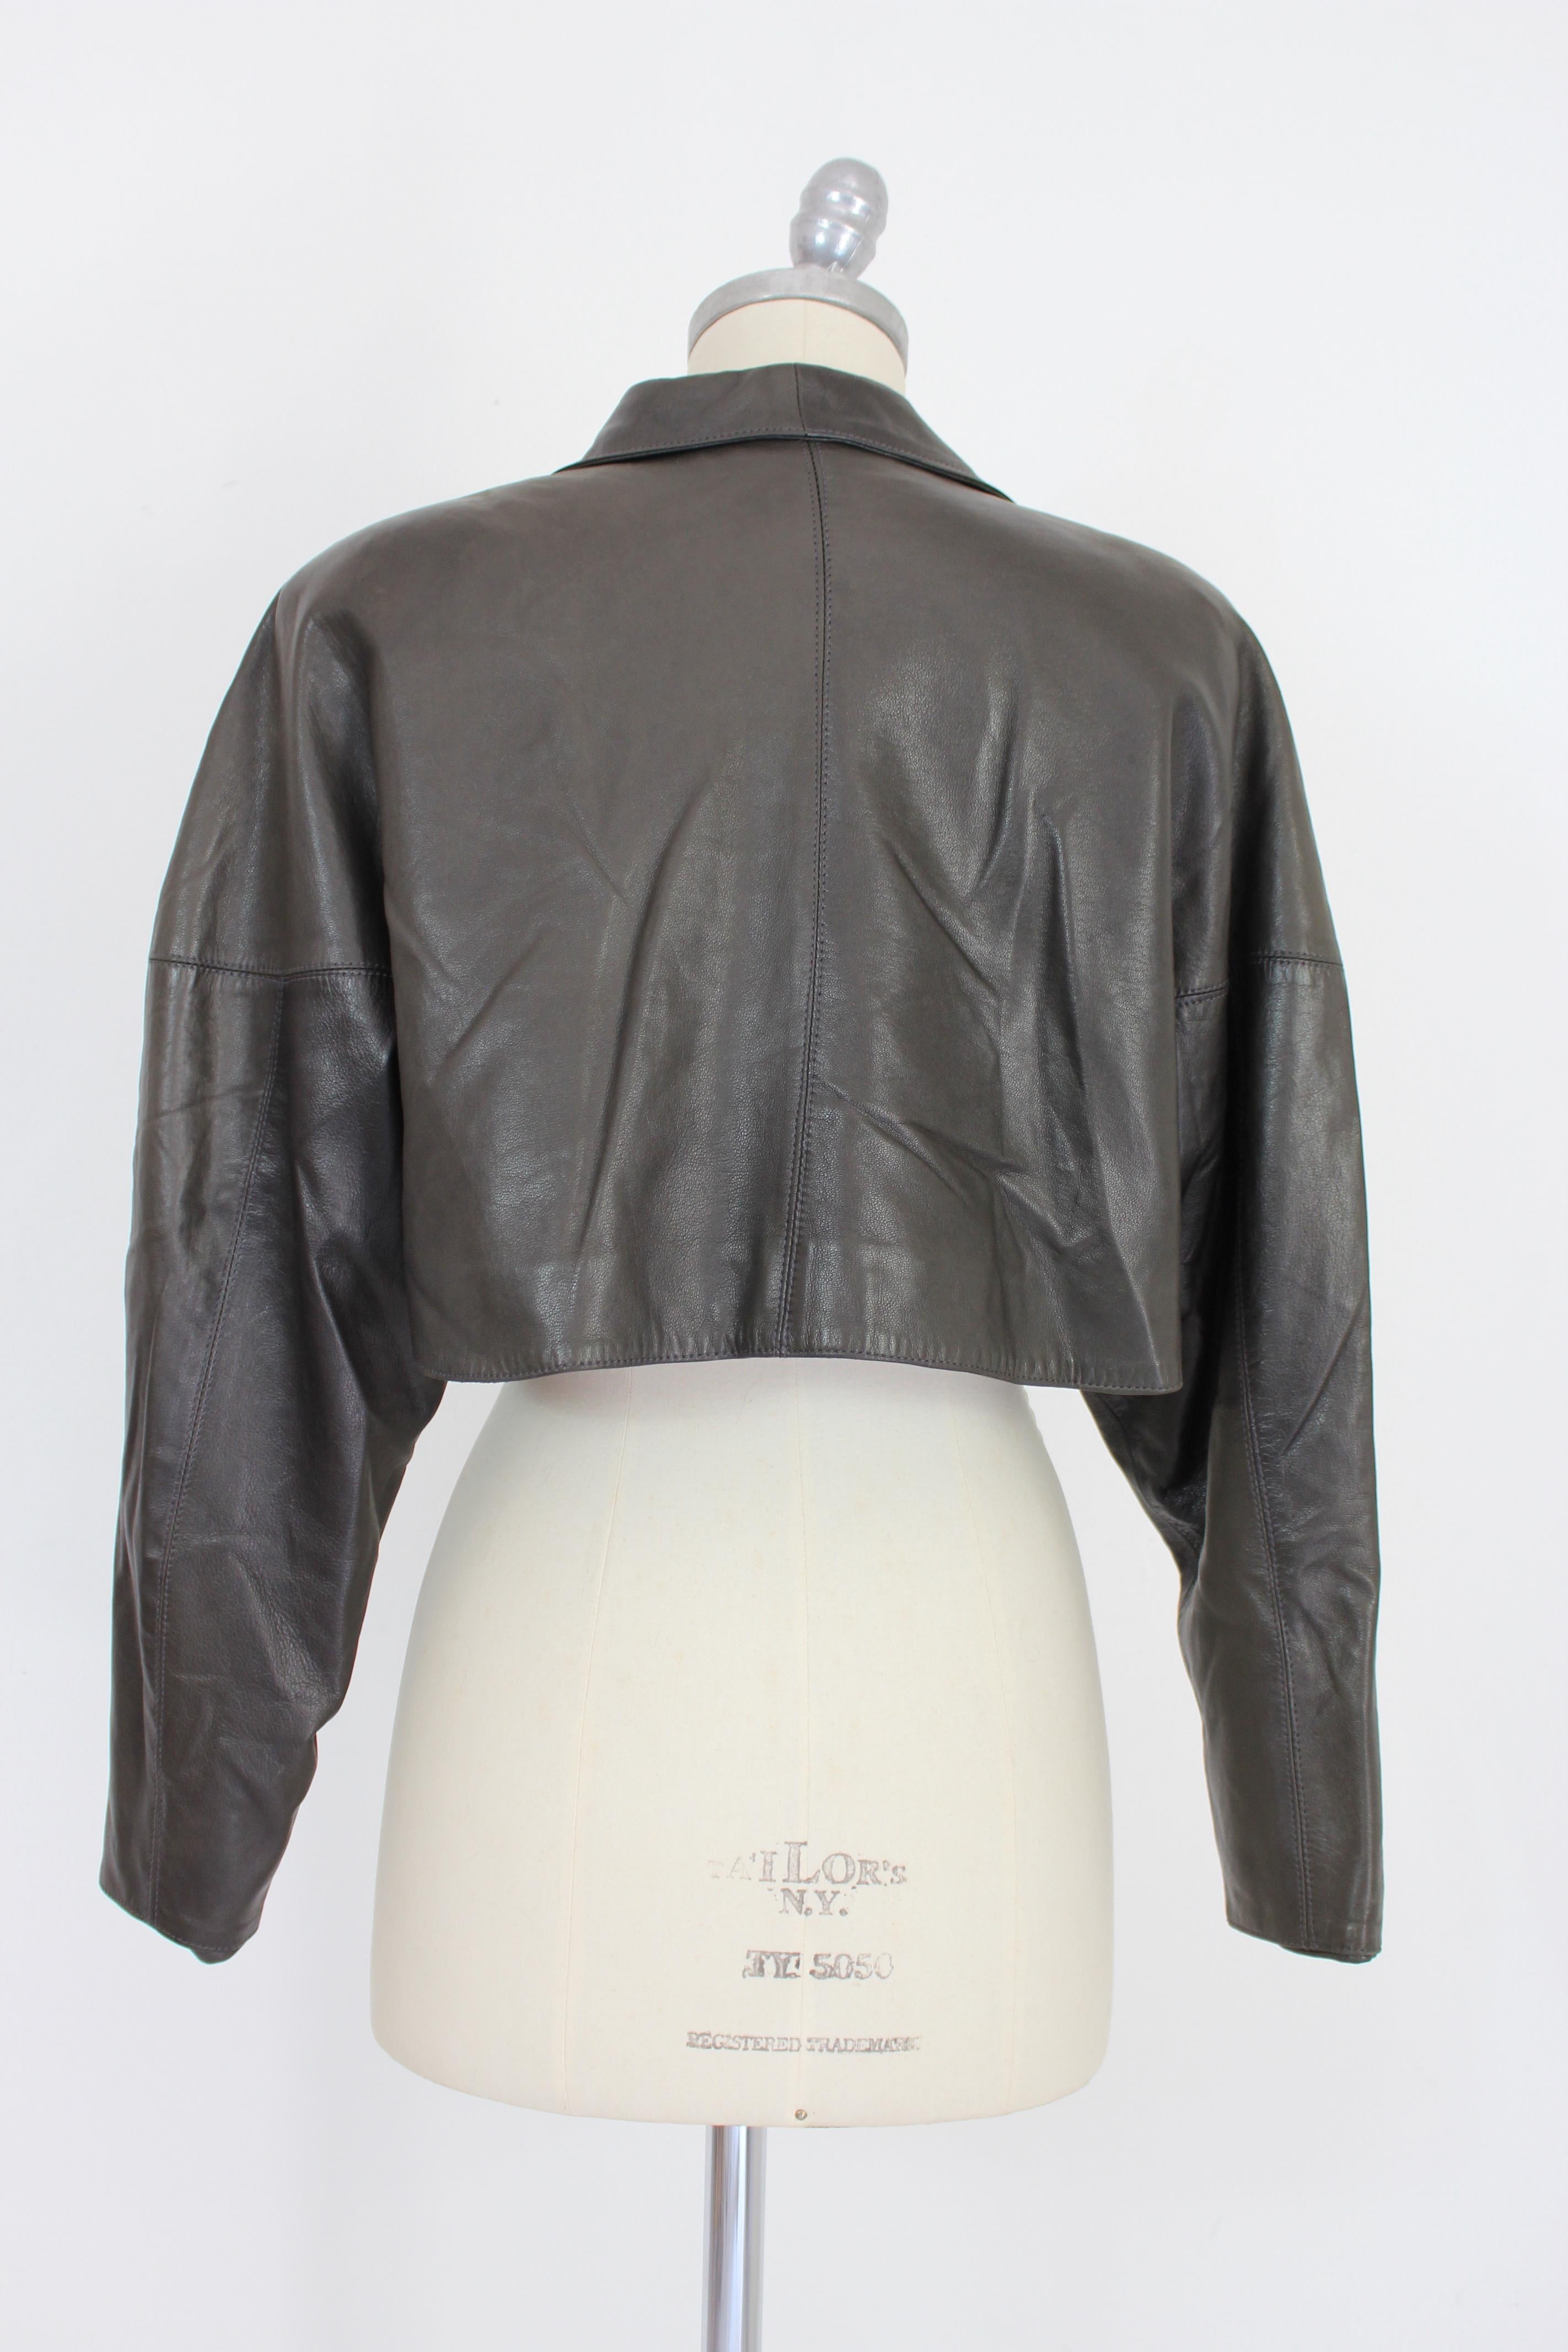 The Azzedine Alaia leather jacket is an iconic piece from the vintage 1980s. This bolero-style jacket is made from high-quality soft leather and features a sleek, black design that is both timeless and versatile. With its clean lines and minimalist